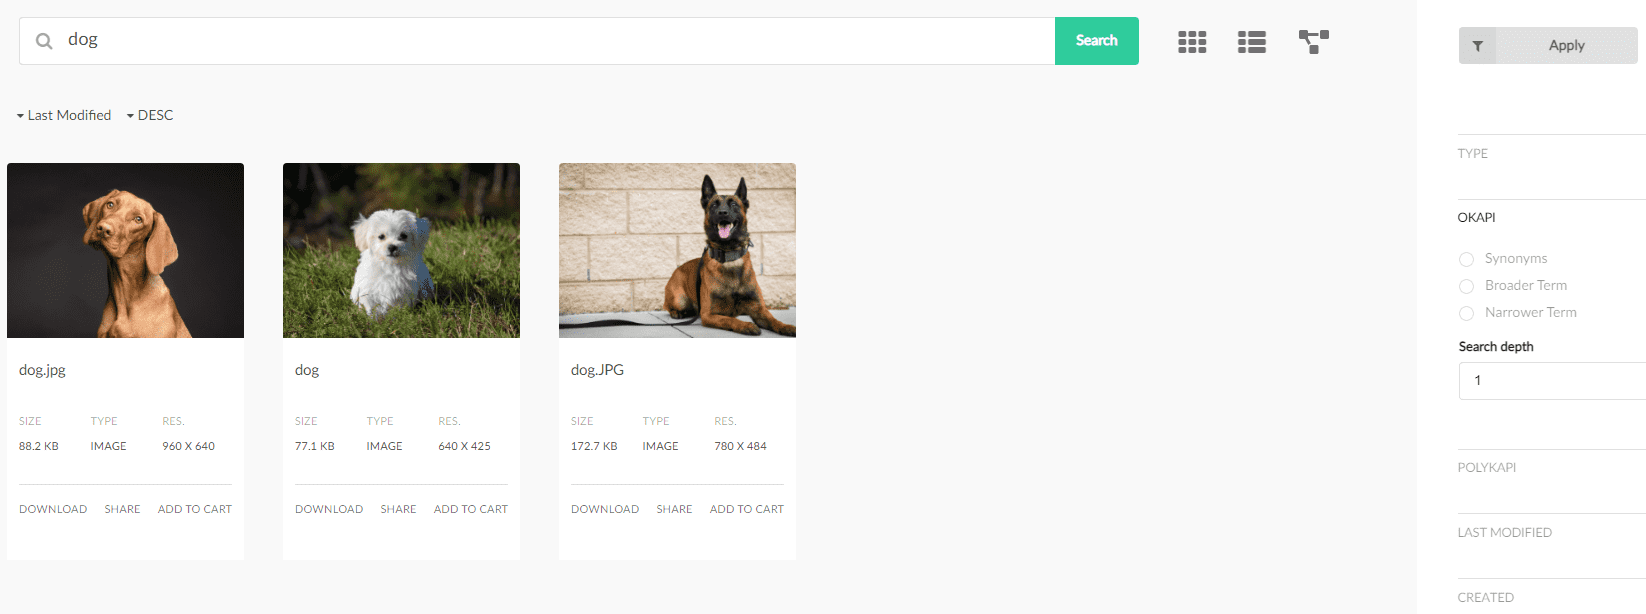 DAM search results. Three pictures of dogs, each containing 'dog' in the filename, shown in response to the simple full-text query, 'dog'.